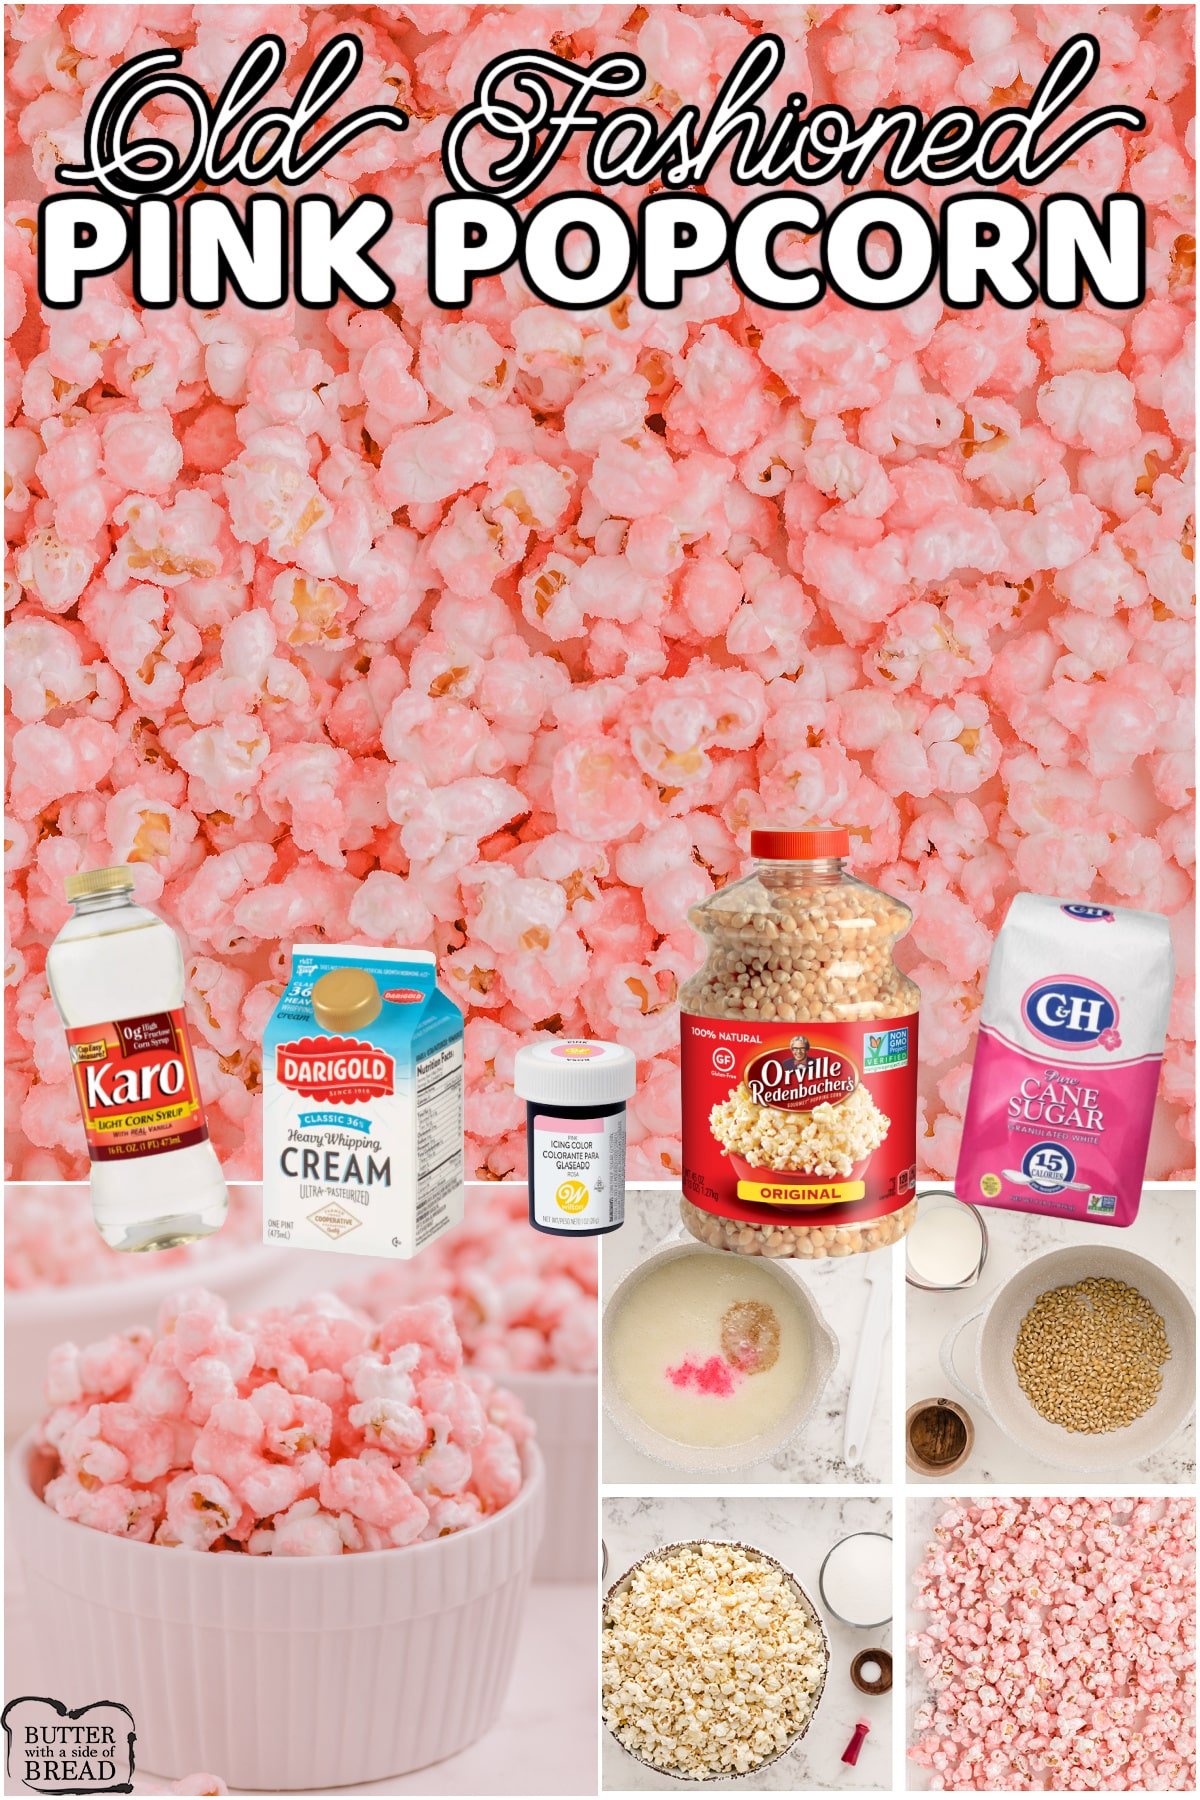 Old-fashioned Pink Popcorn made with whipping cream, sugar & pink coloring for a festive, candy coated treat! Pink popcorn perfect for parties, baby showers or anyone who loves PINK! 